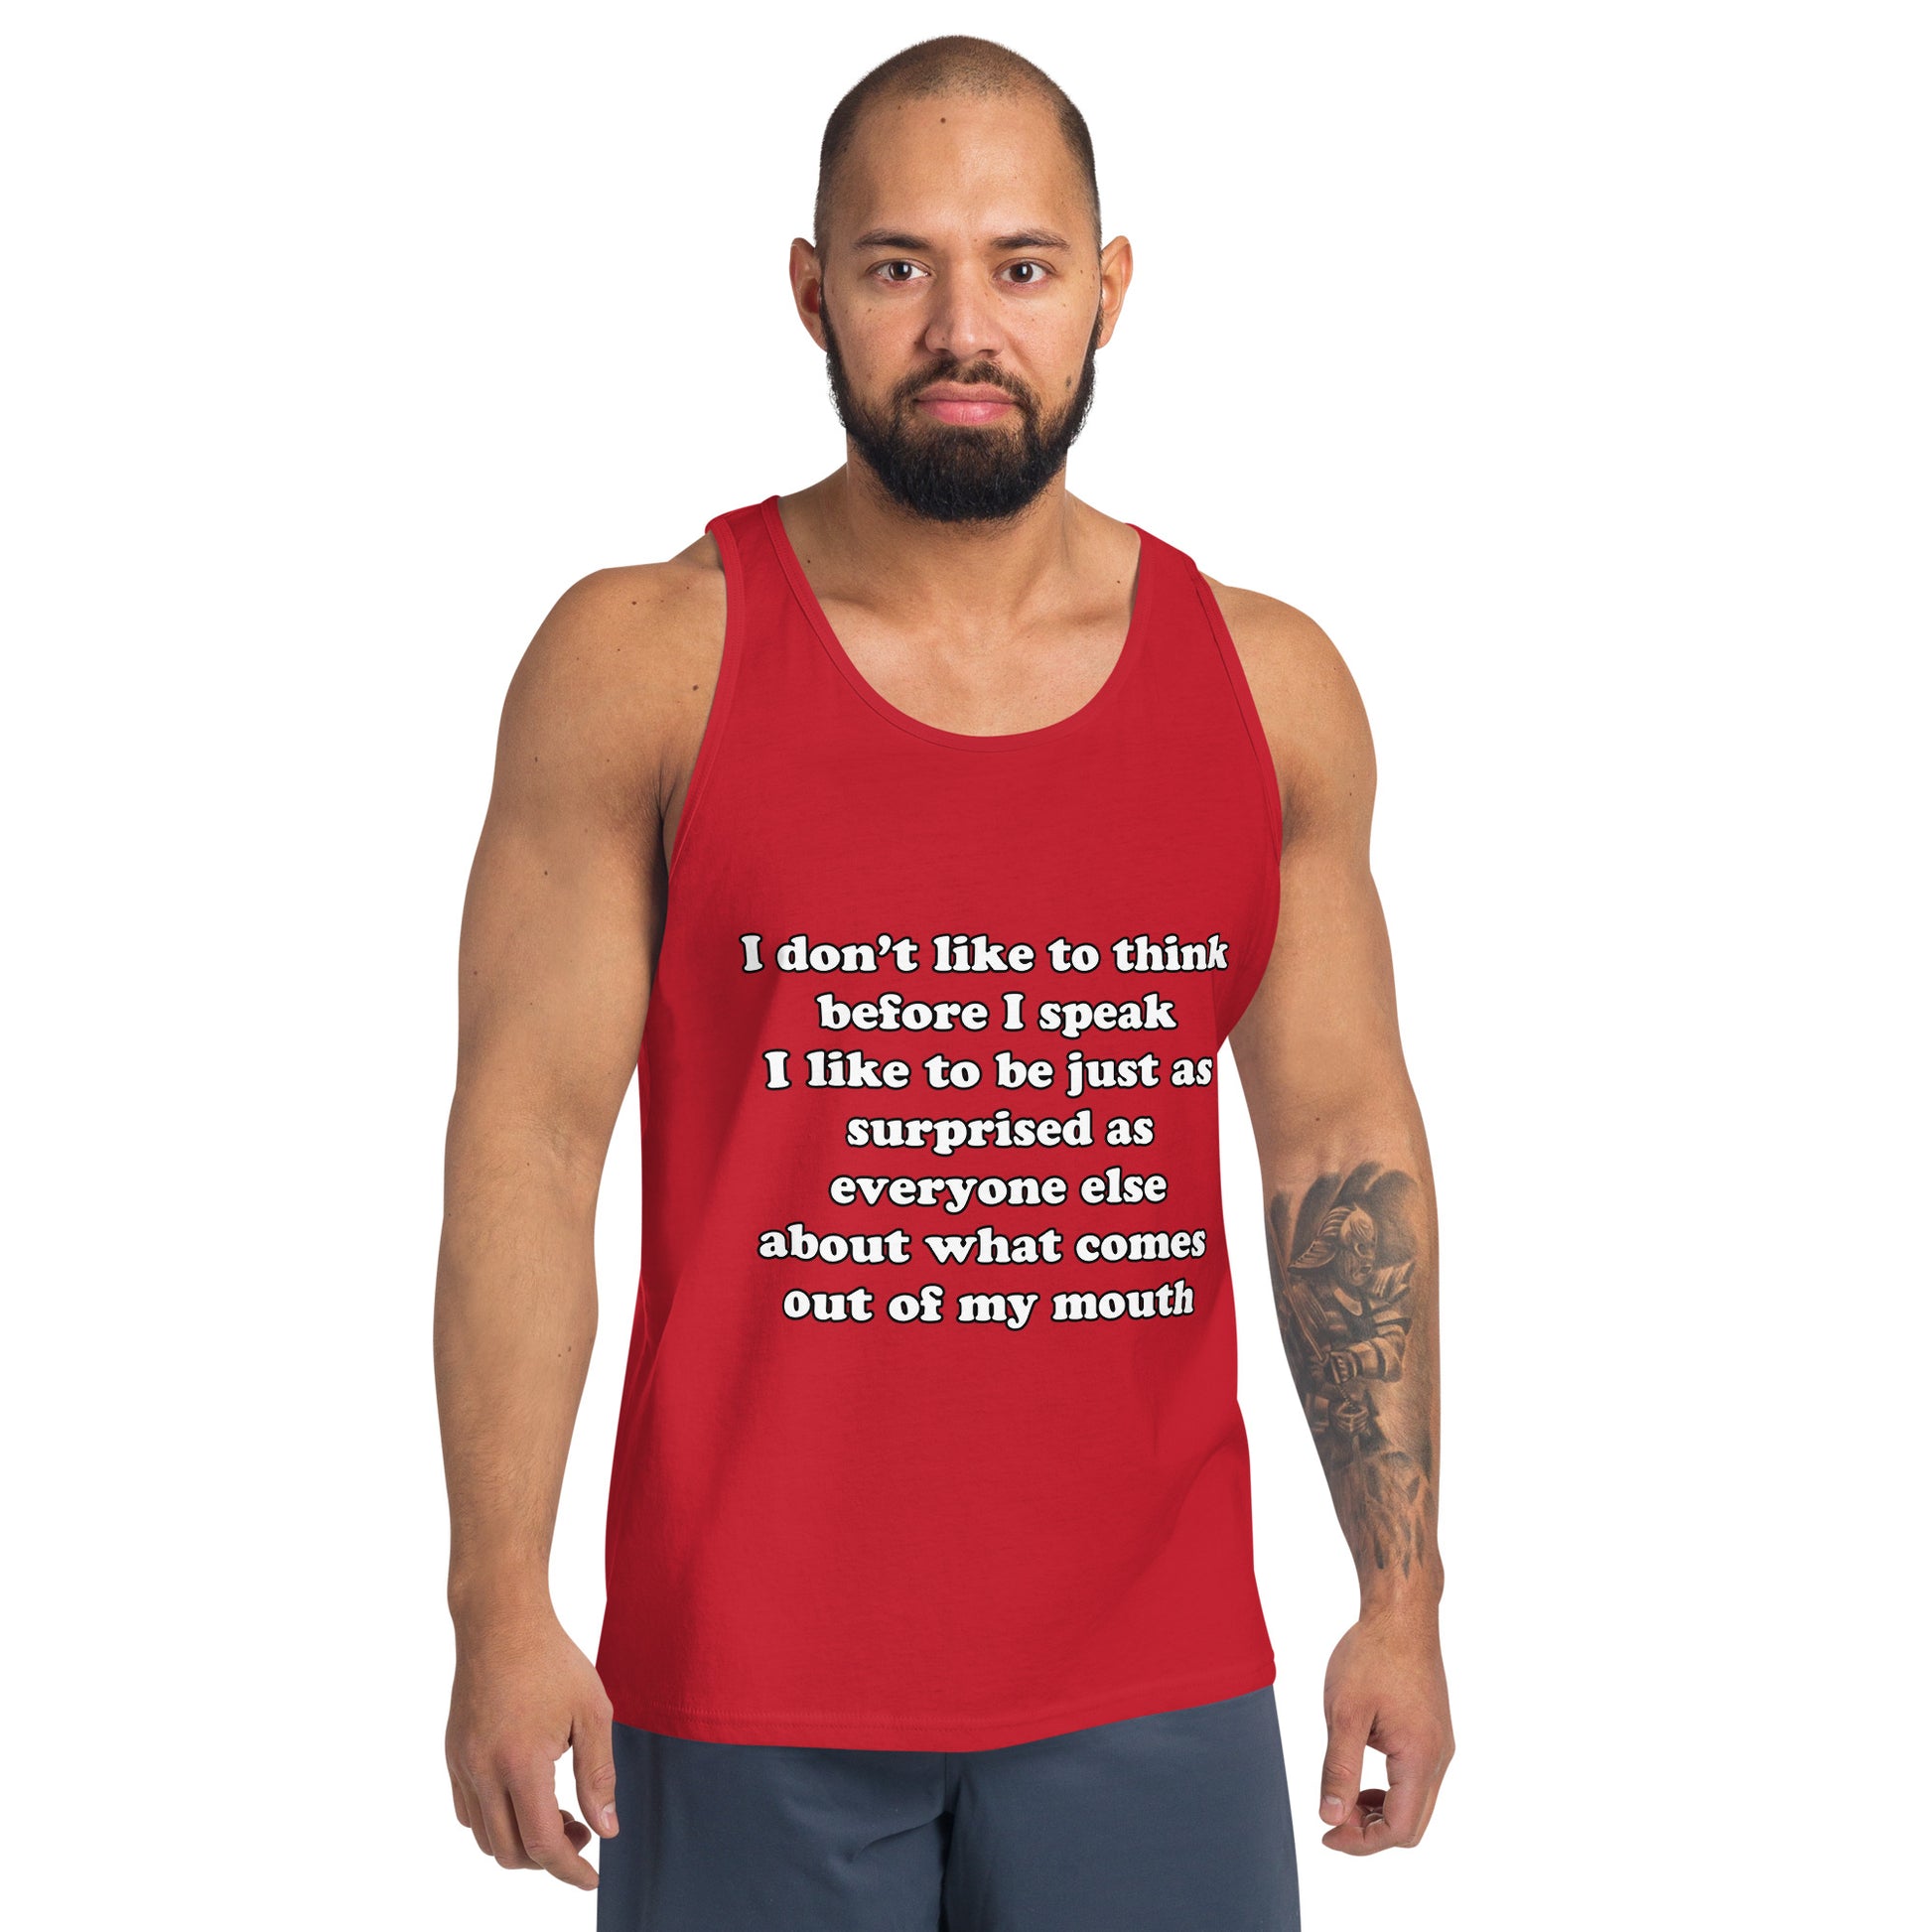 Man with red tank top with text “I don't think before I speak Just as serprised as everyone about what comes out of my mouth"